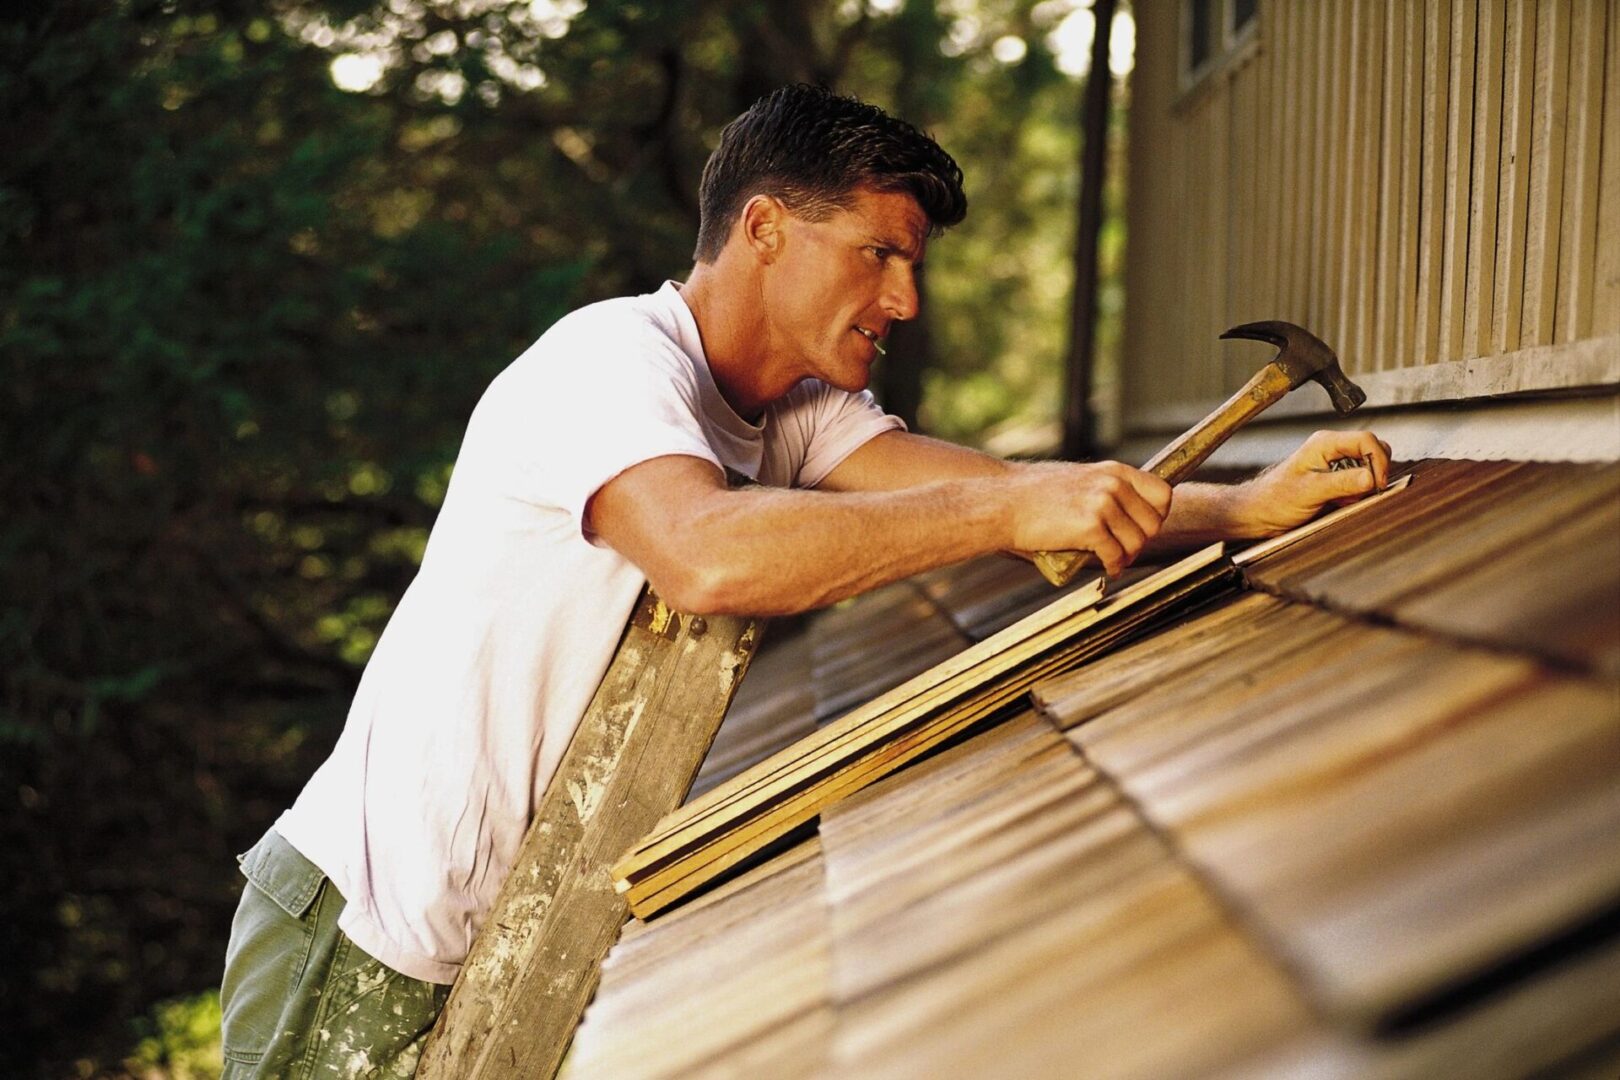 A man working on the roof of his house.